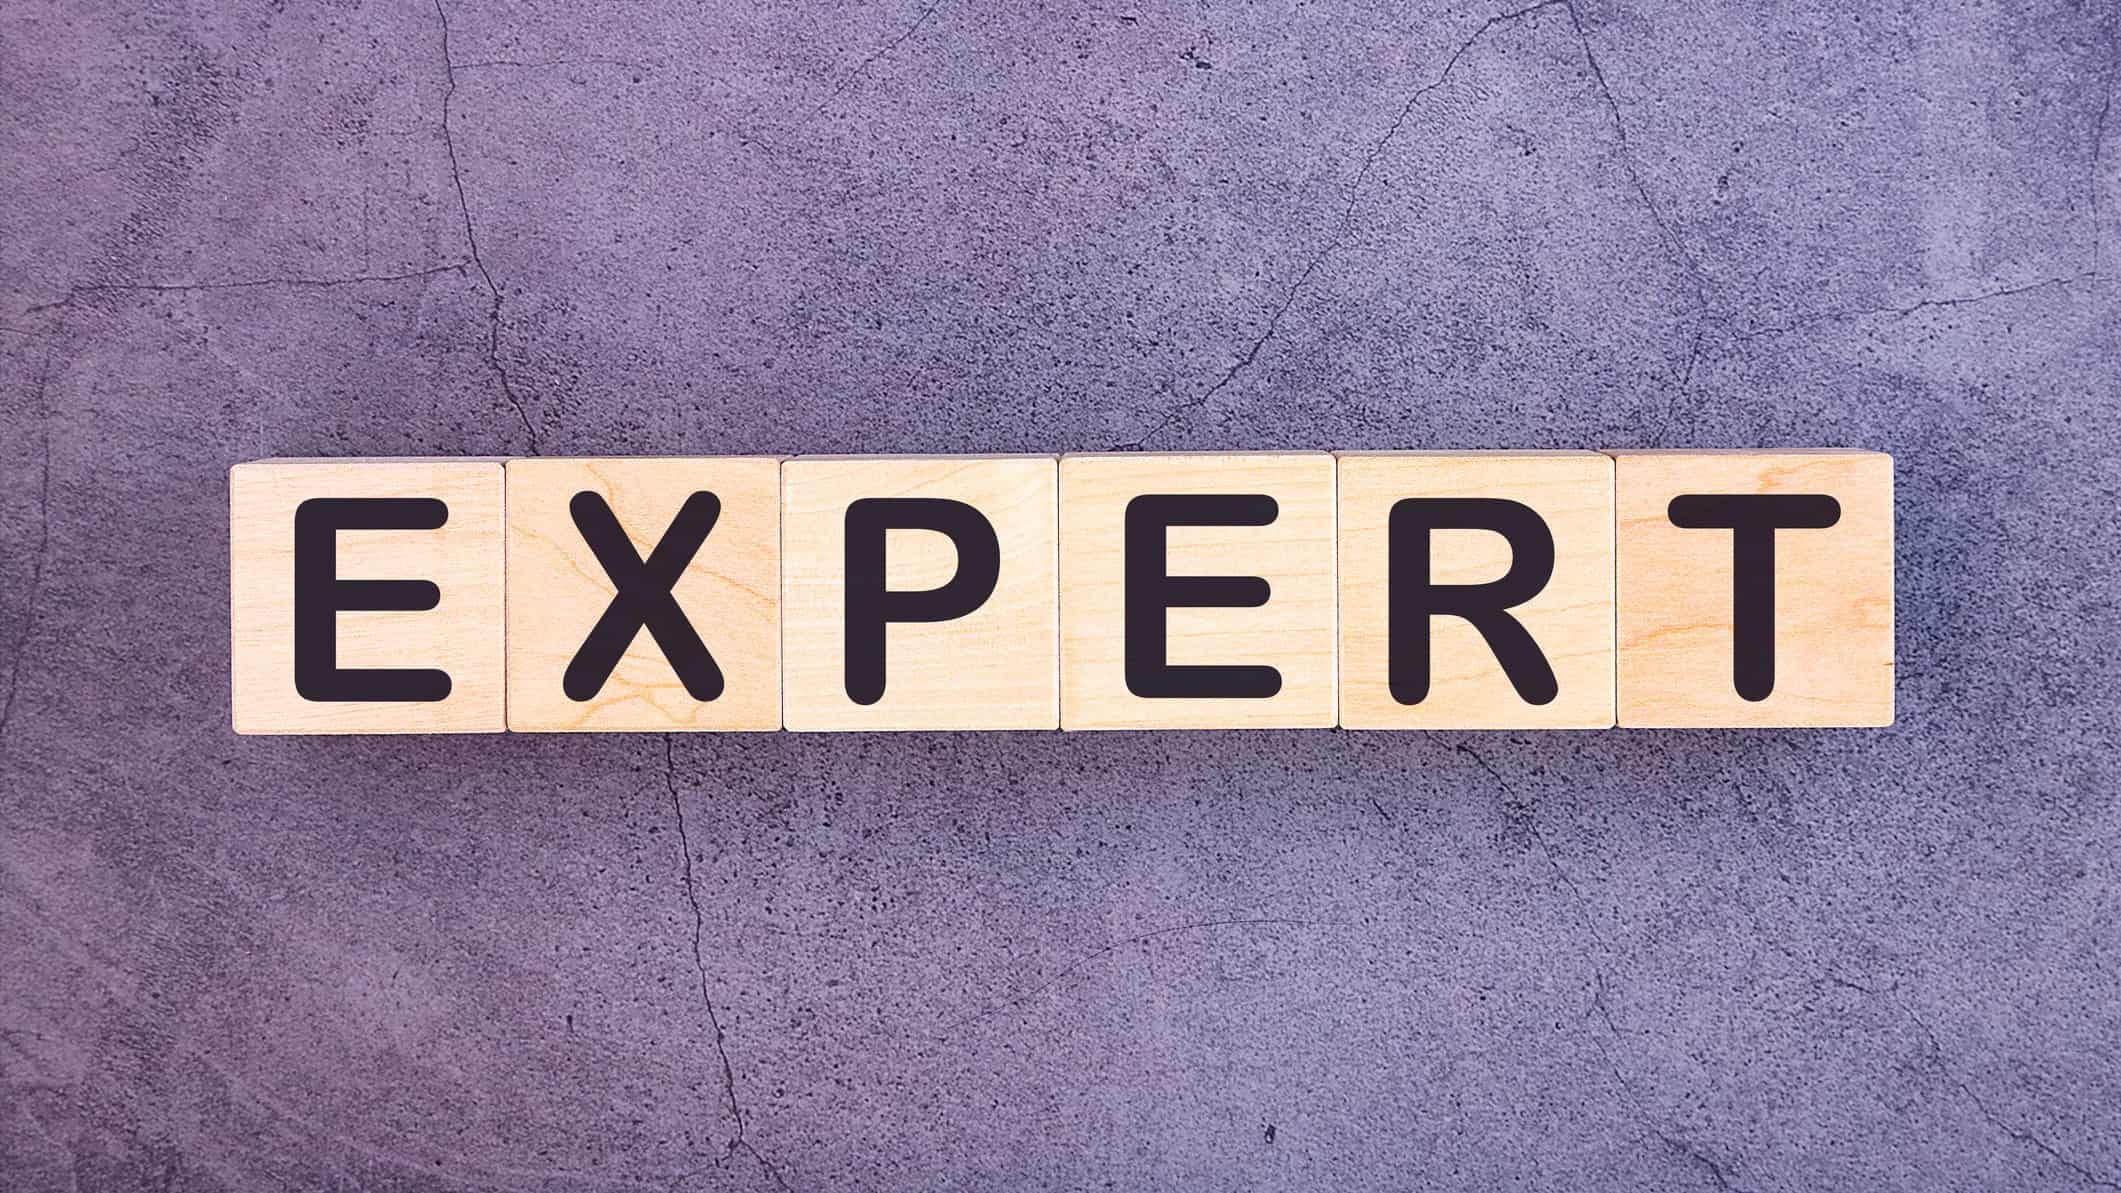 asx shares investing experts represented by blocks spelling the word expert